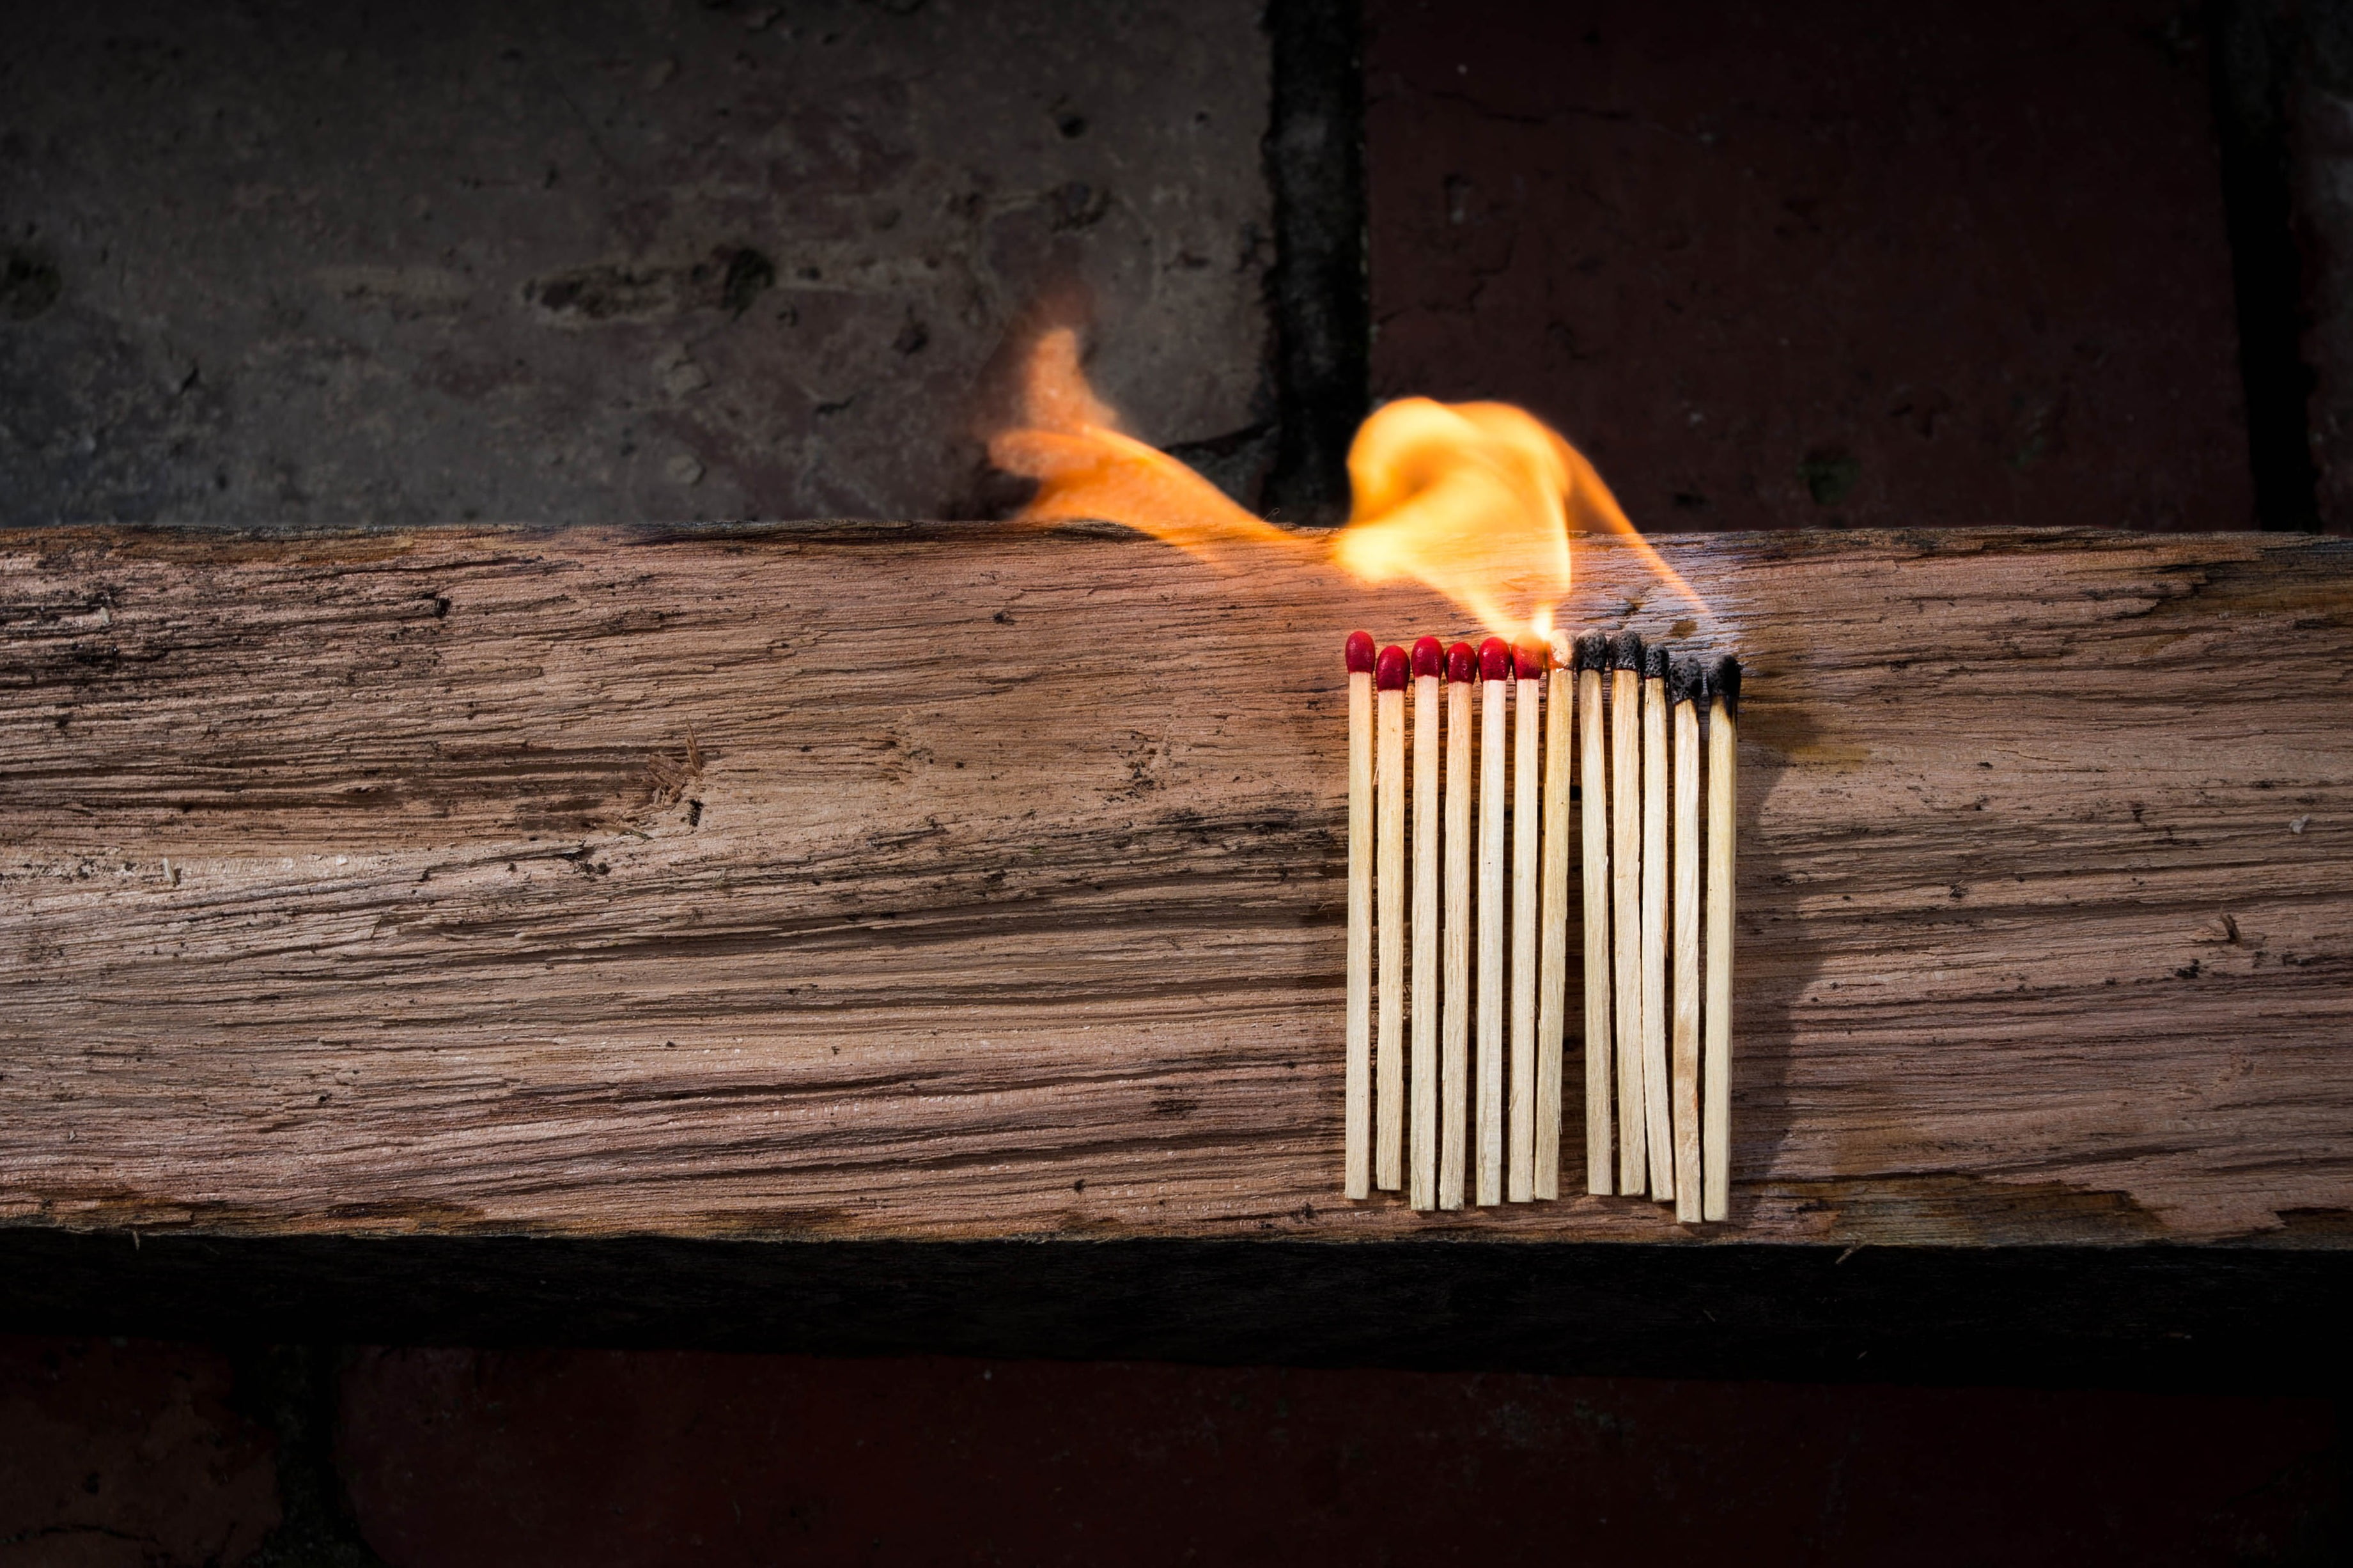 time lapse photo of matchsticks on fire on wooden board